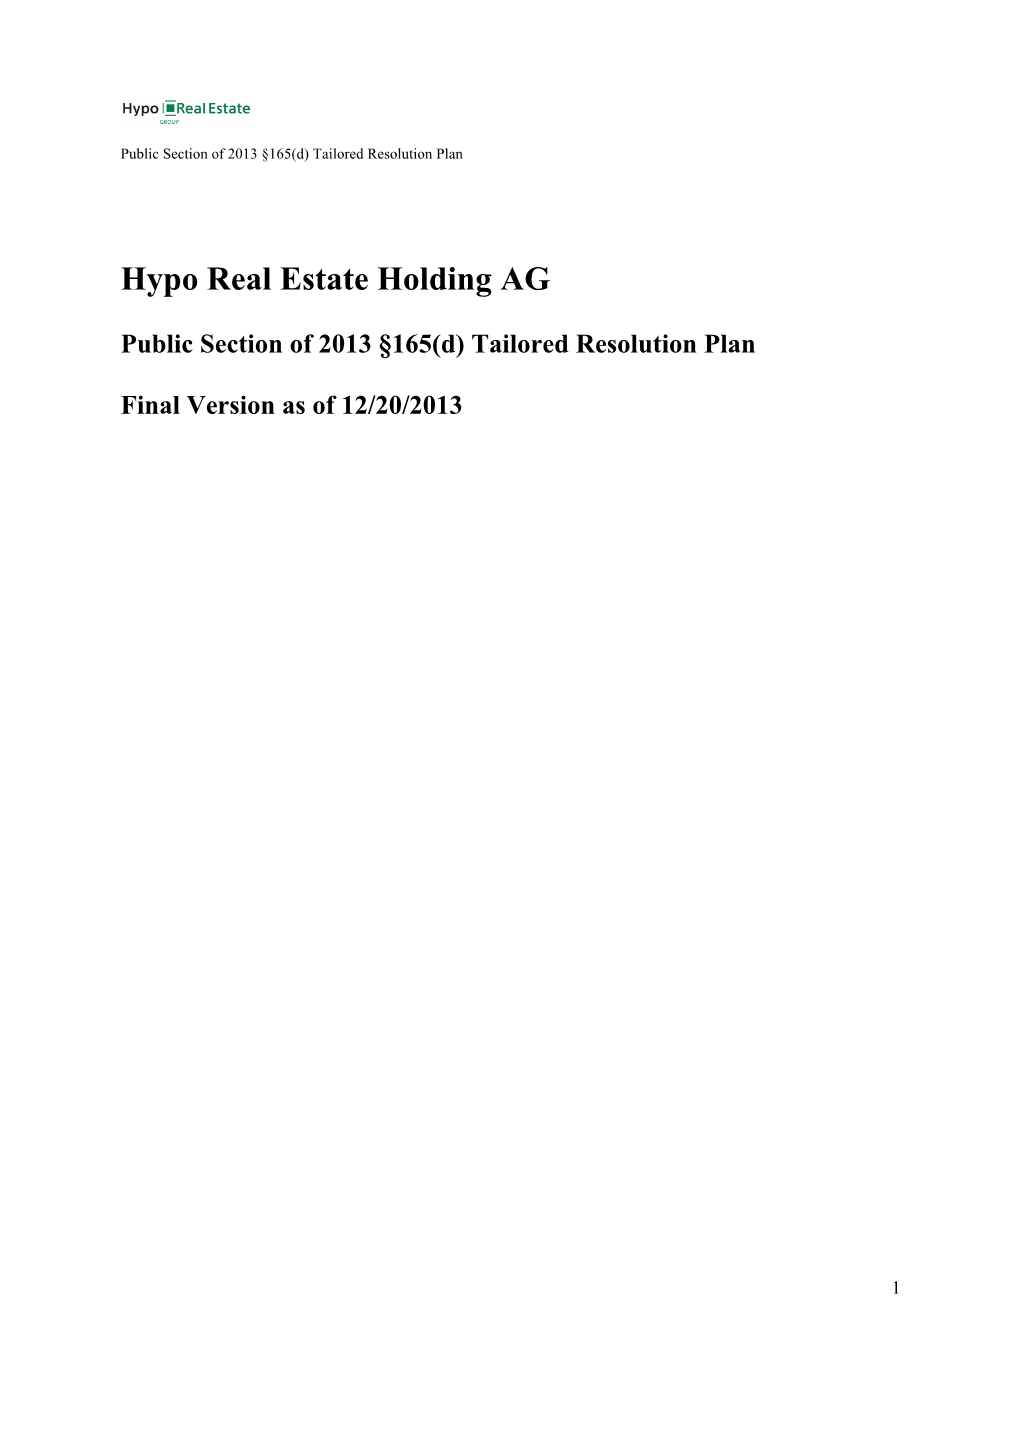 Hypo Real Estate Holding AG